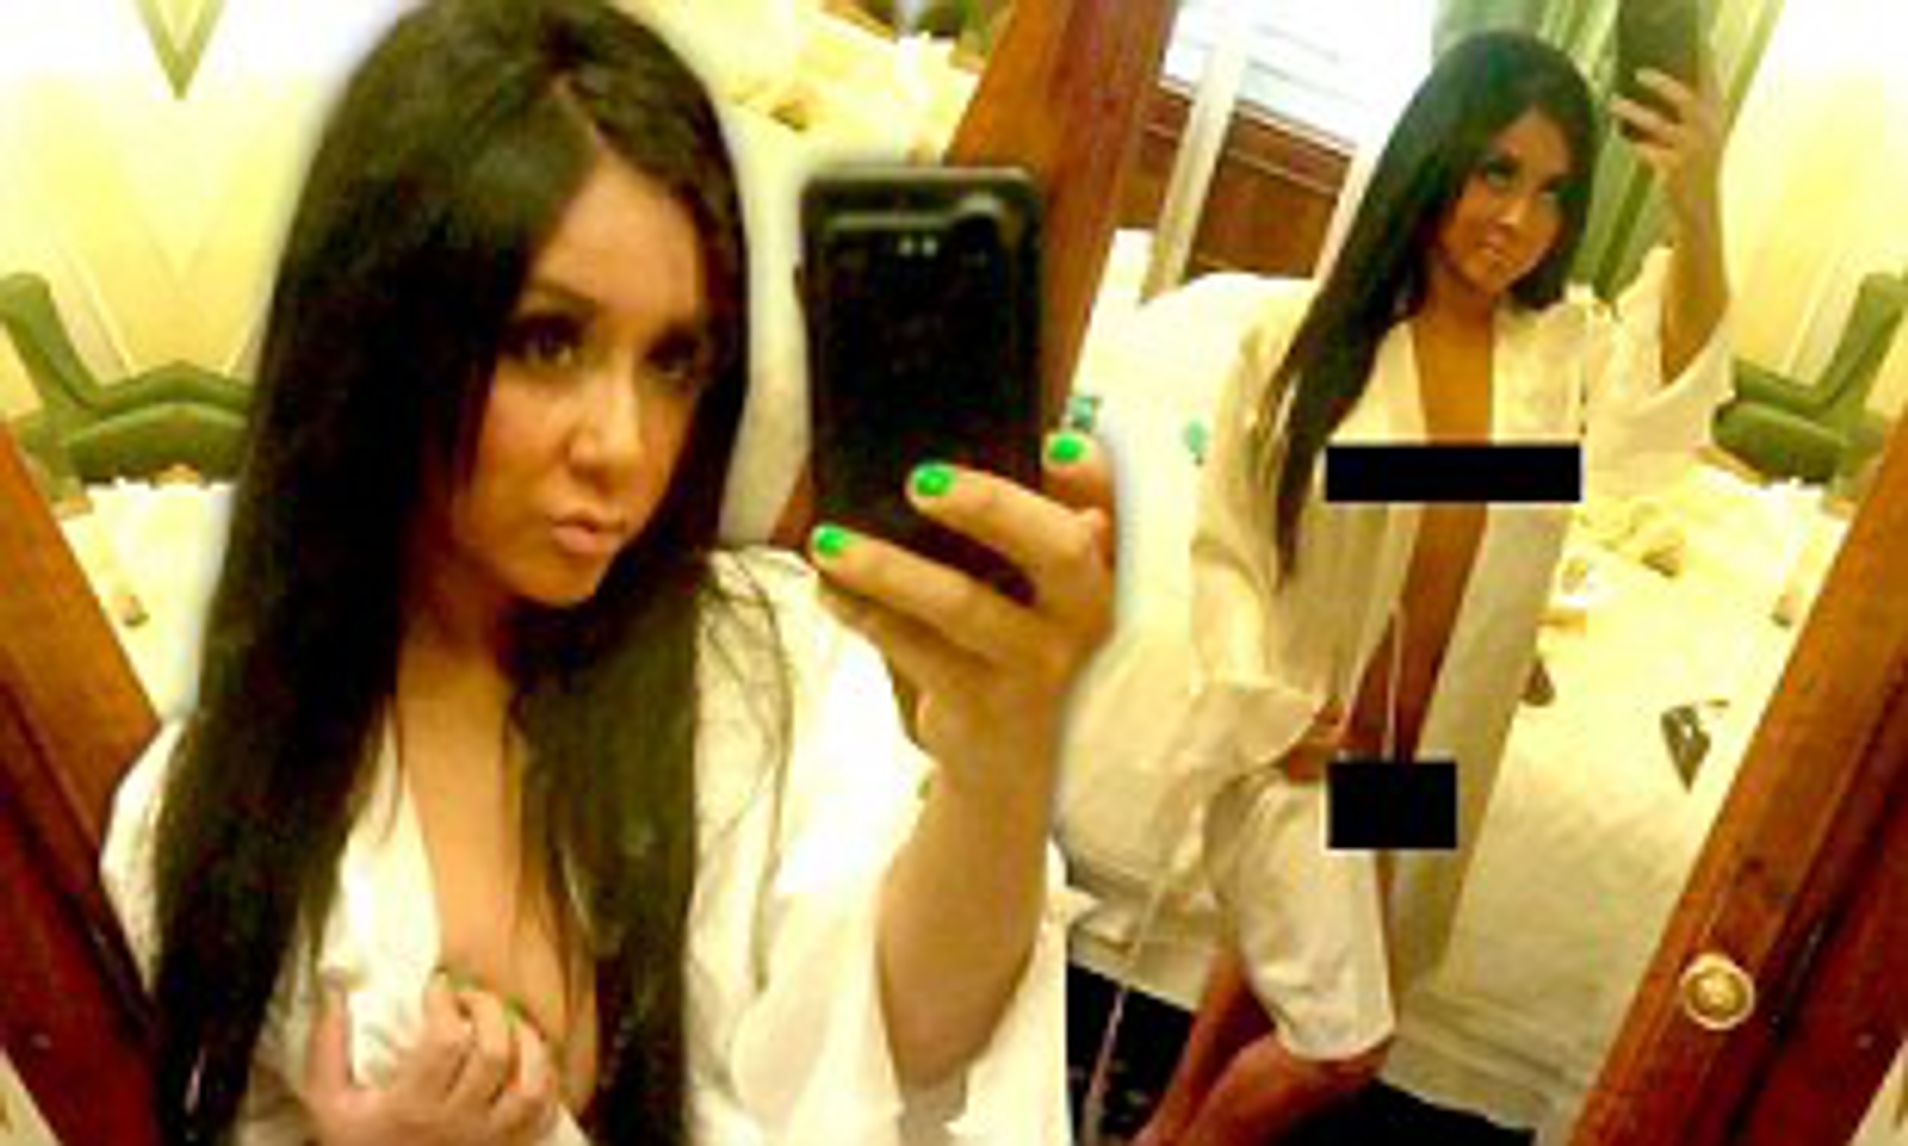 danielle bicknell share snooki nude pictures photos